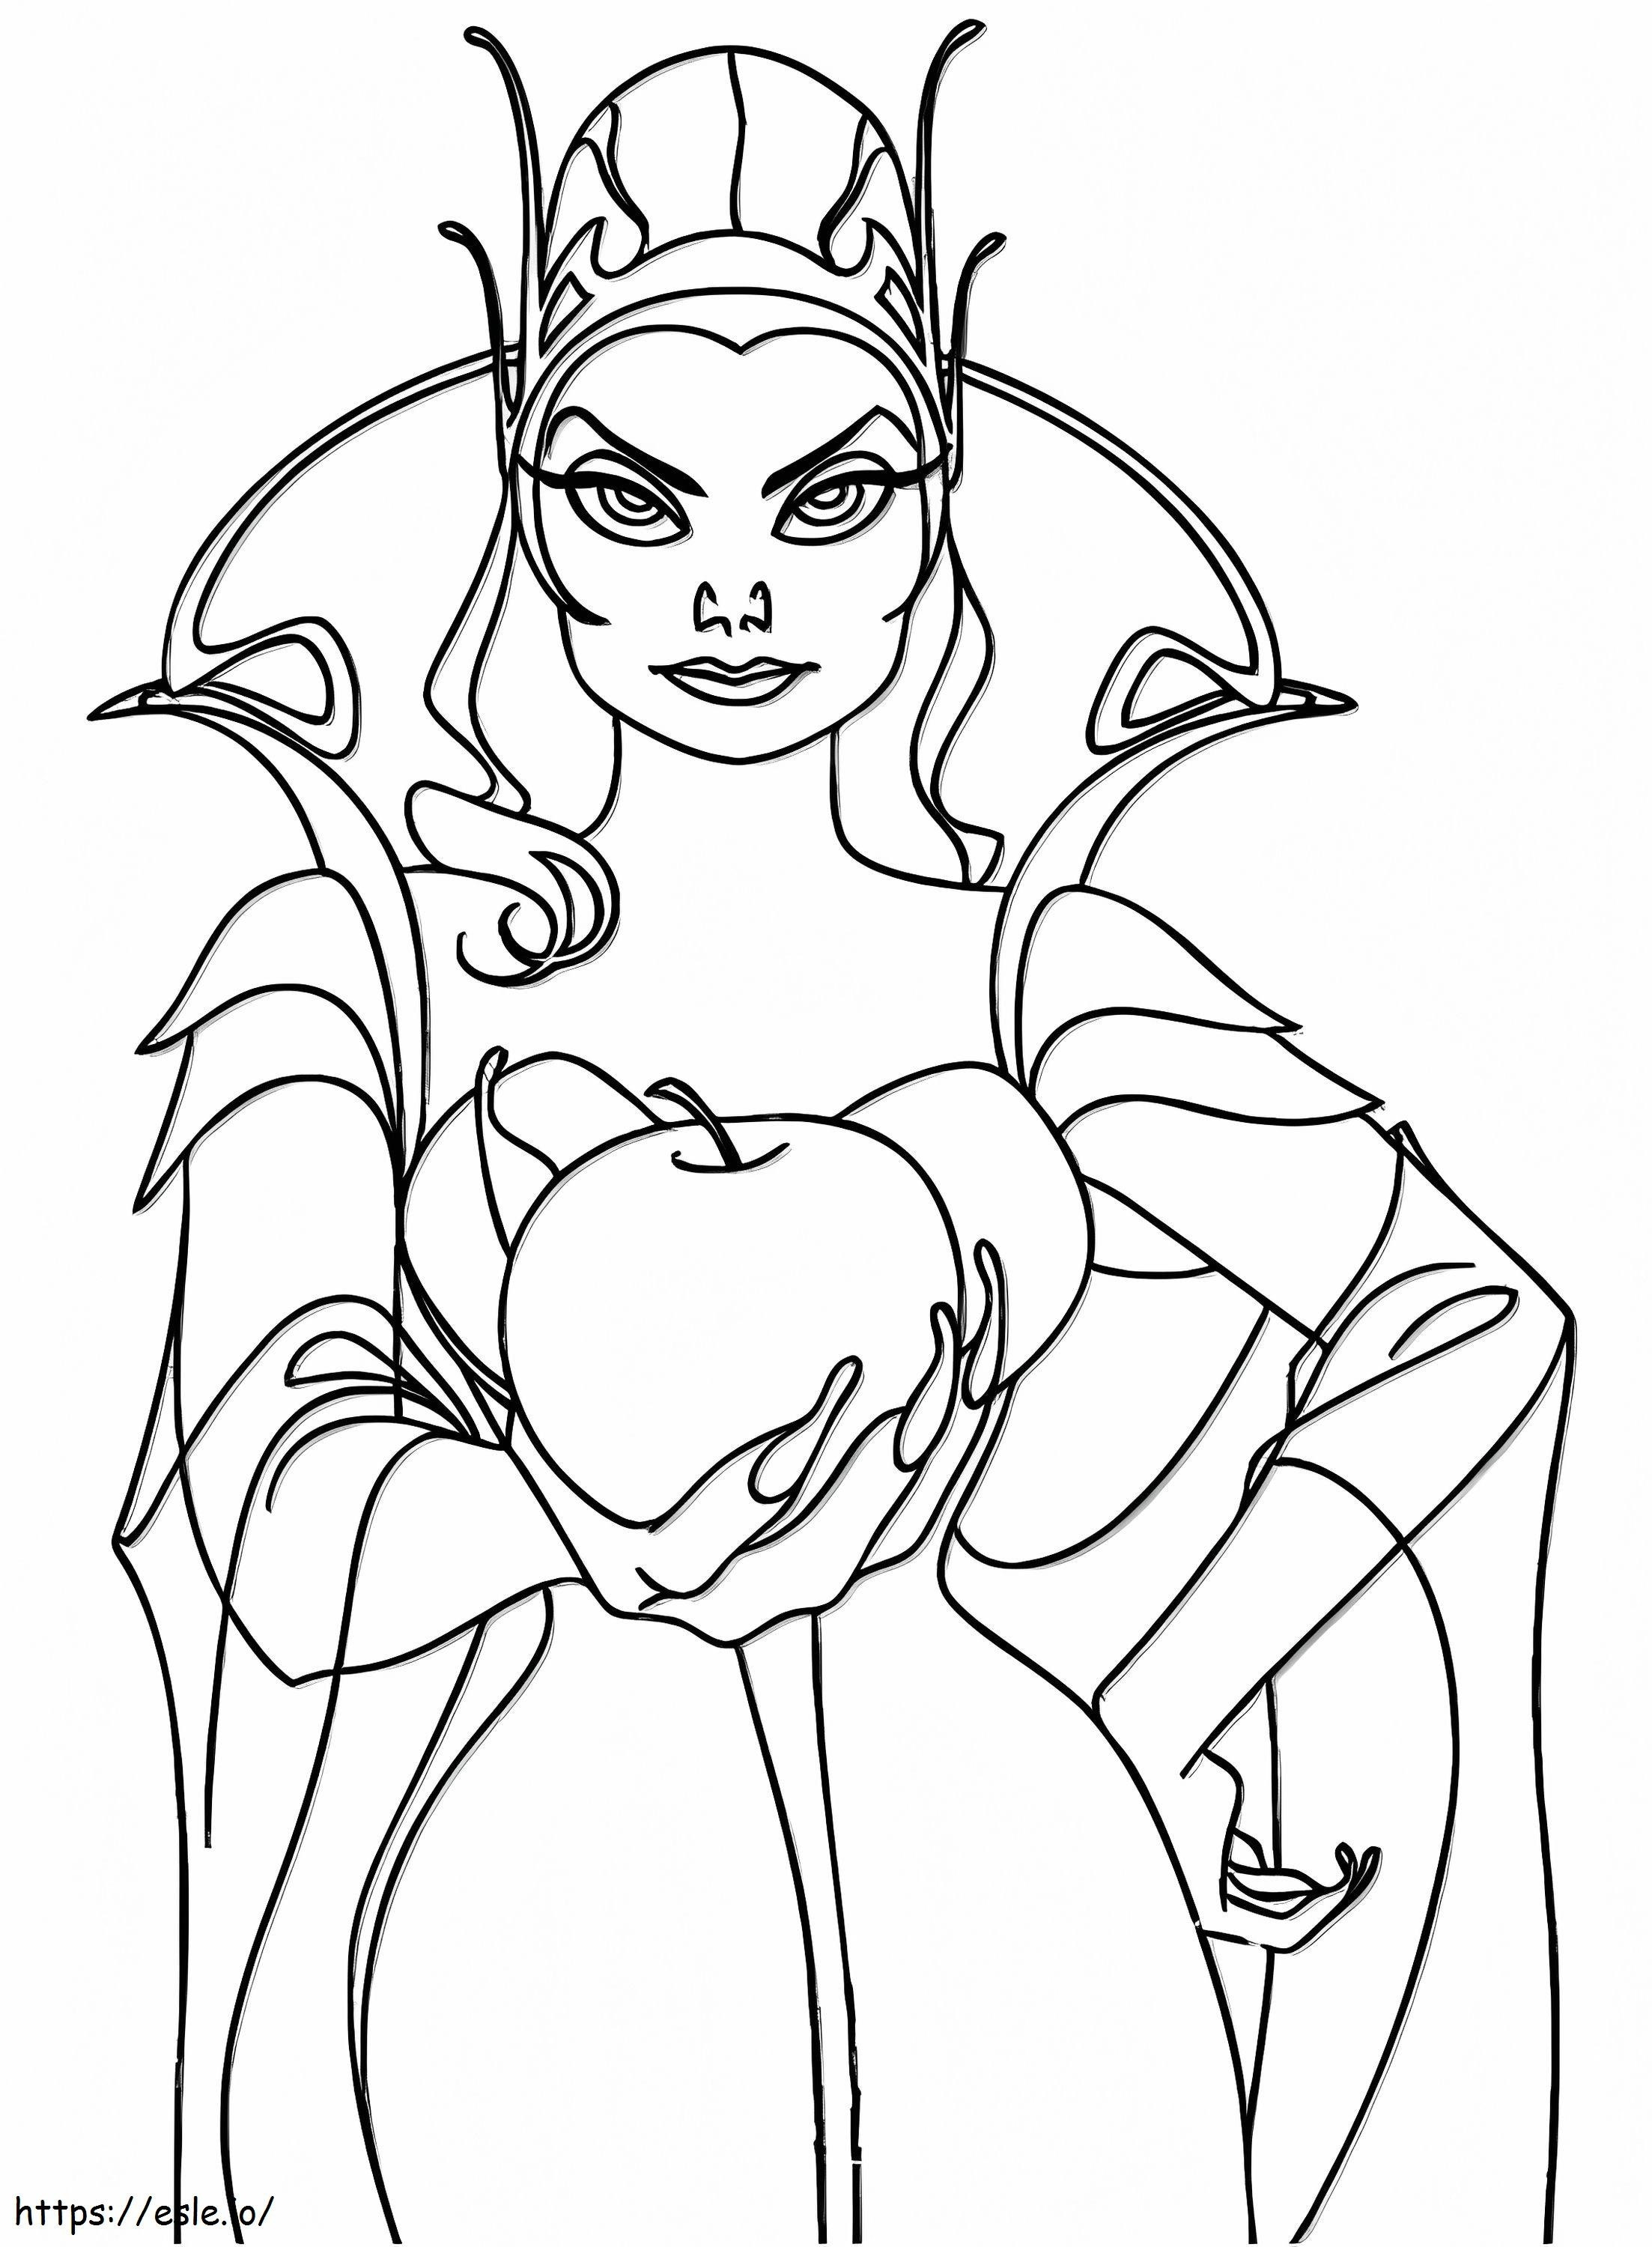 In Queen Bunk A4 coloring page